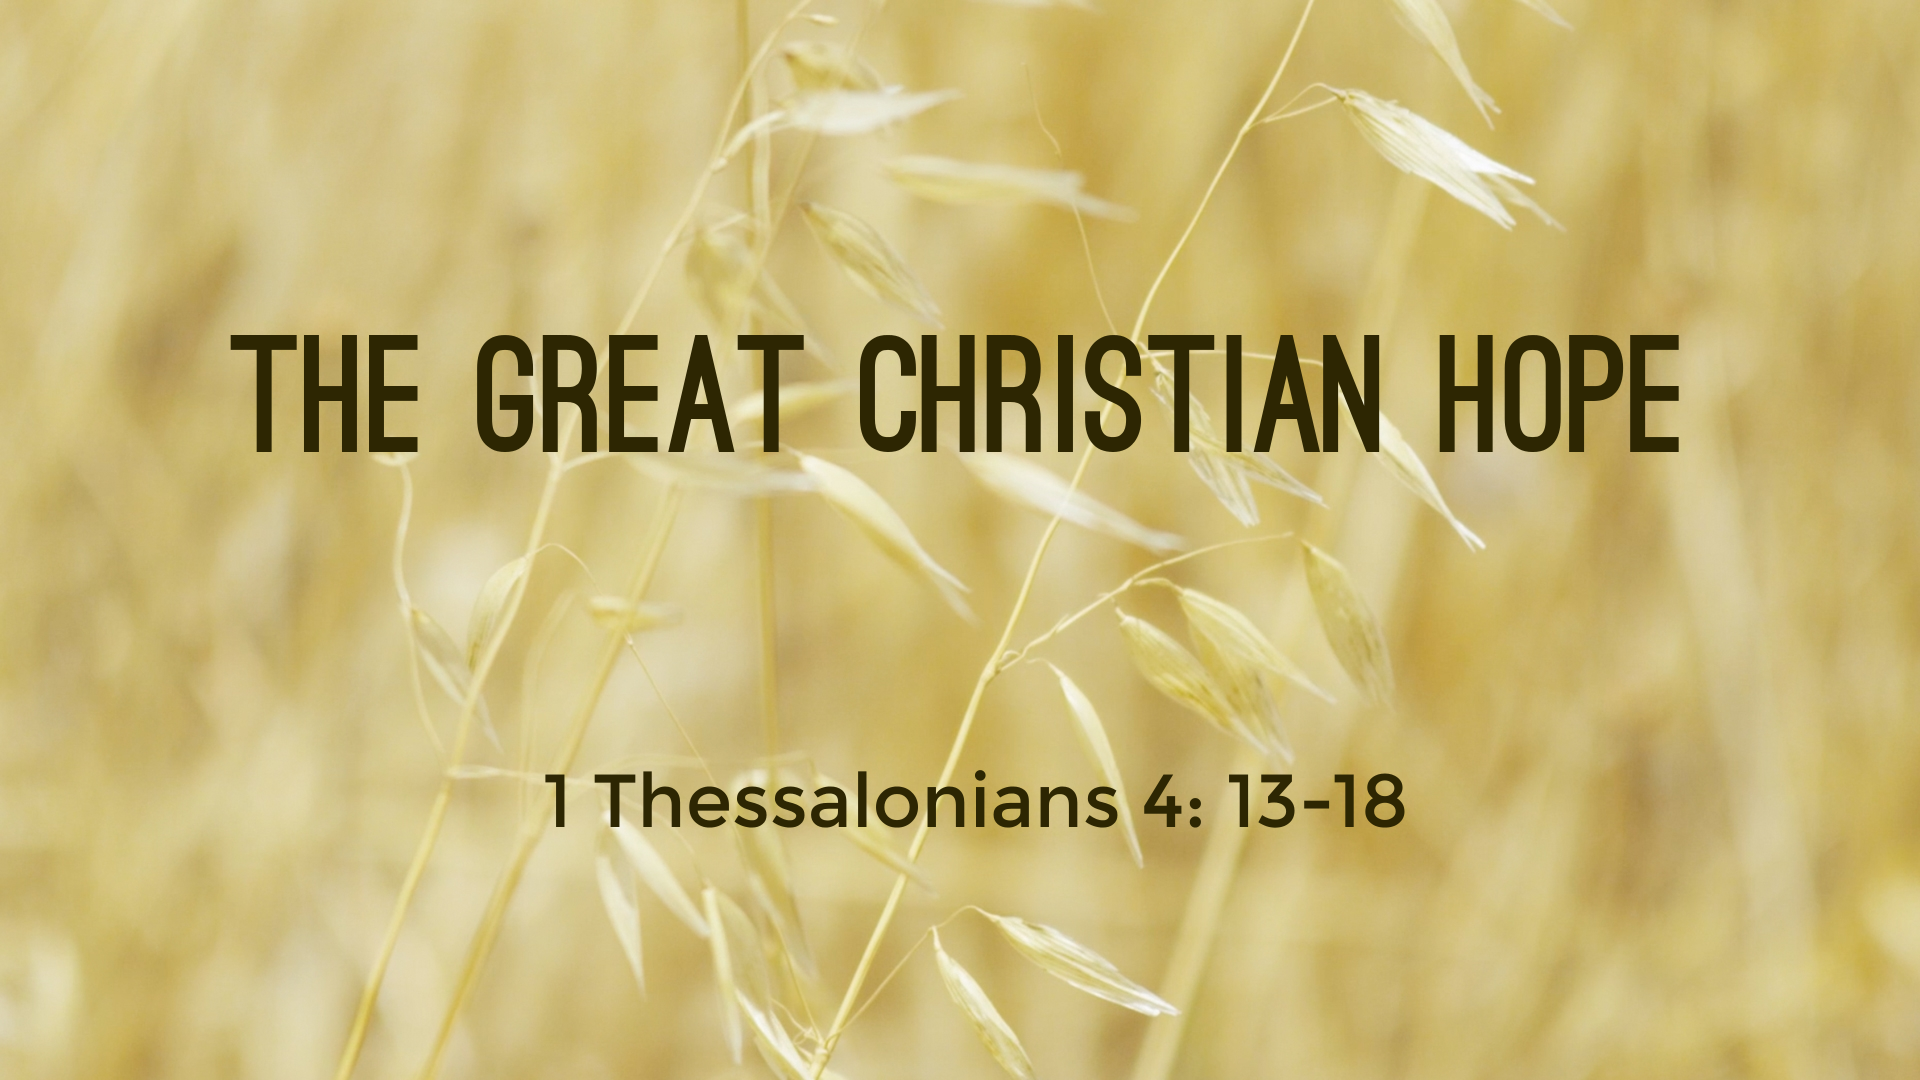 May 29, 2022 - The Great Christian Hope (Video) 1 Thessalonians 4: 13-18